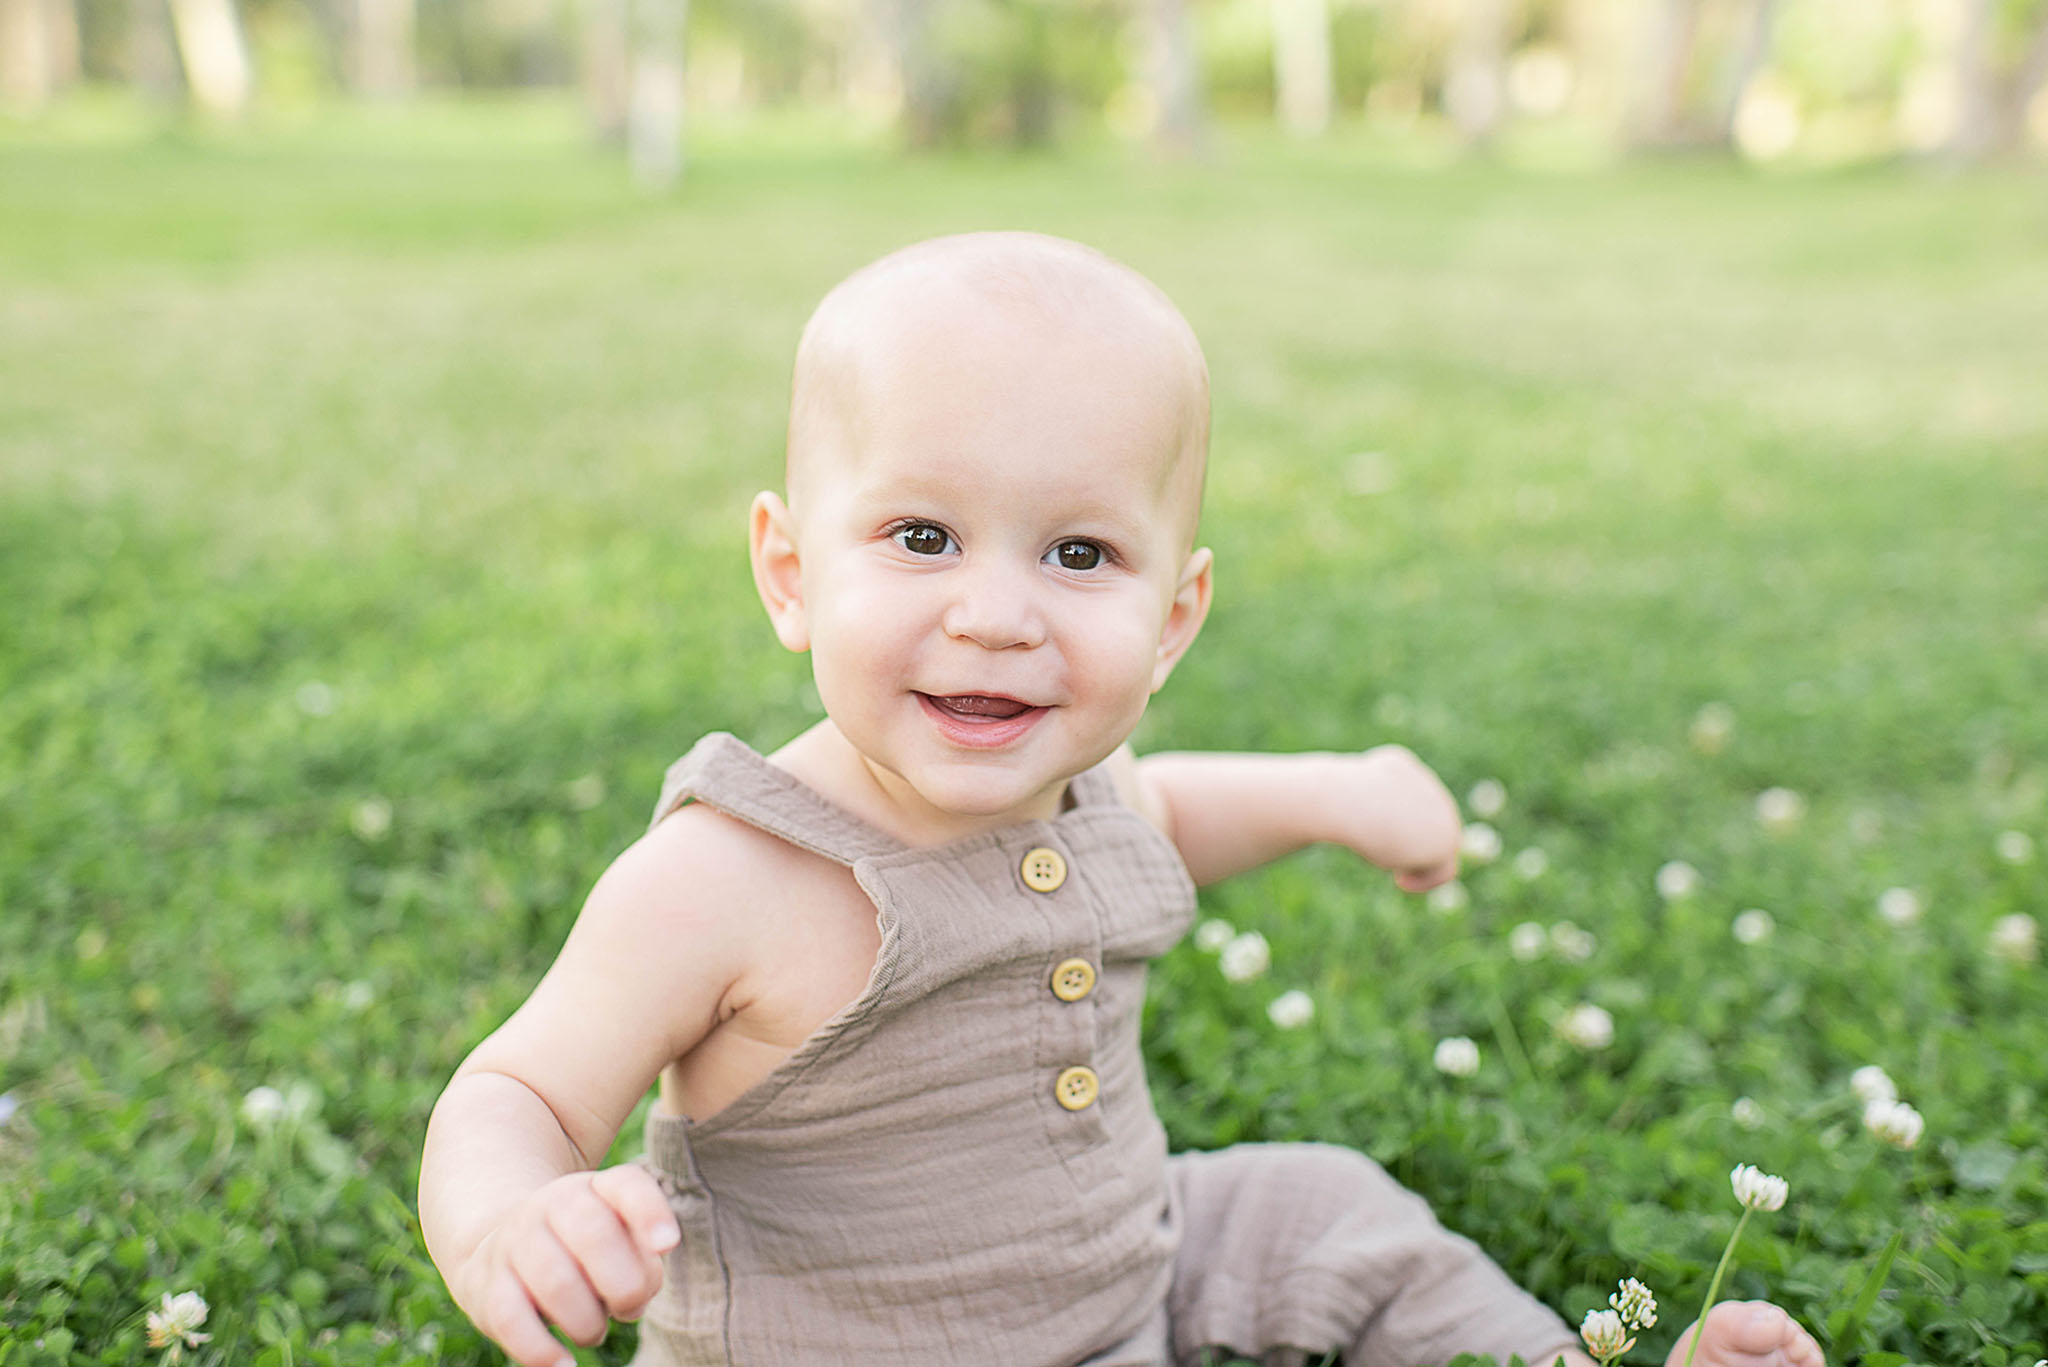 A toddler in brown overalls sits and plays in a field of clover jacksonville baby stores